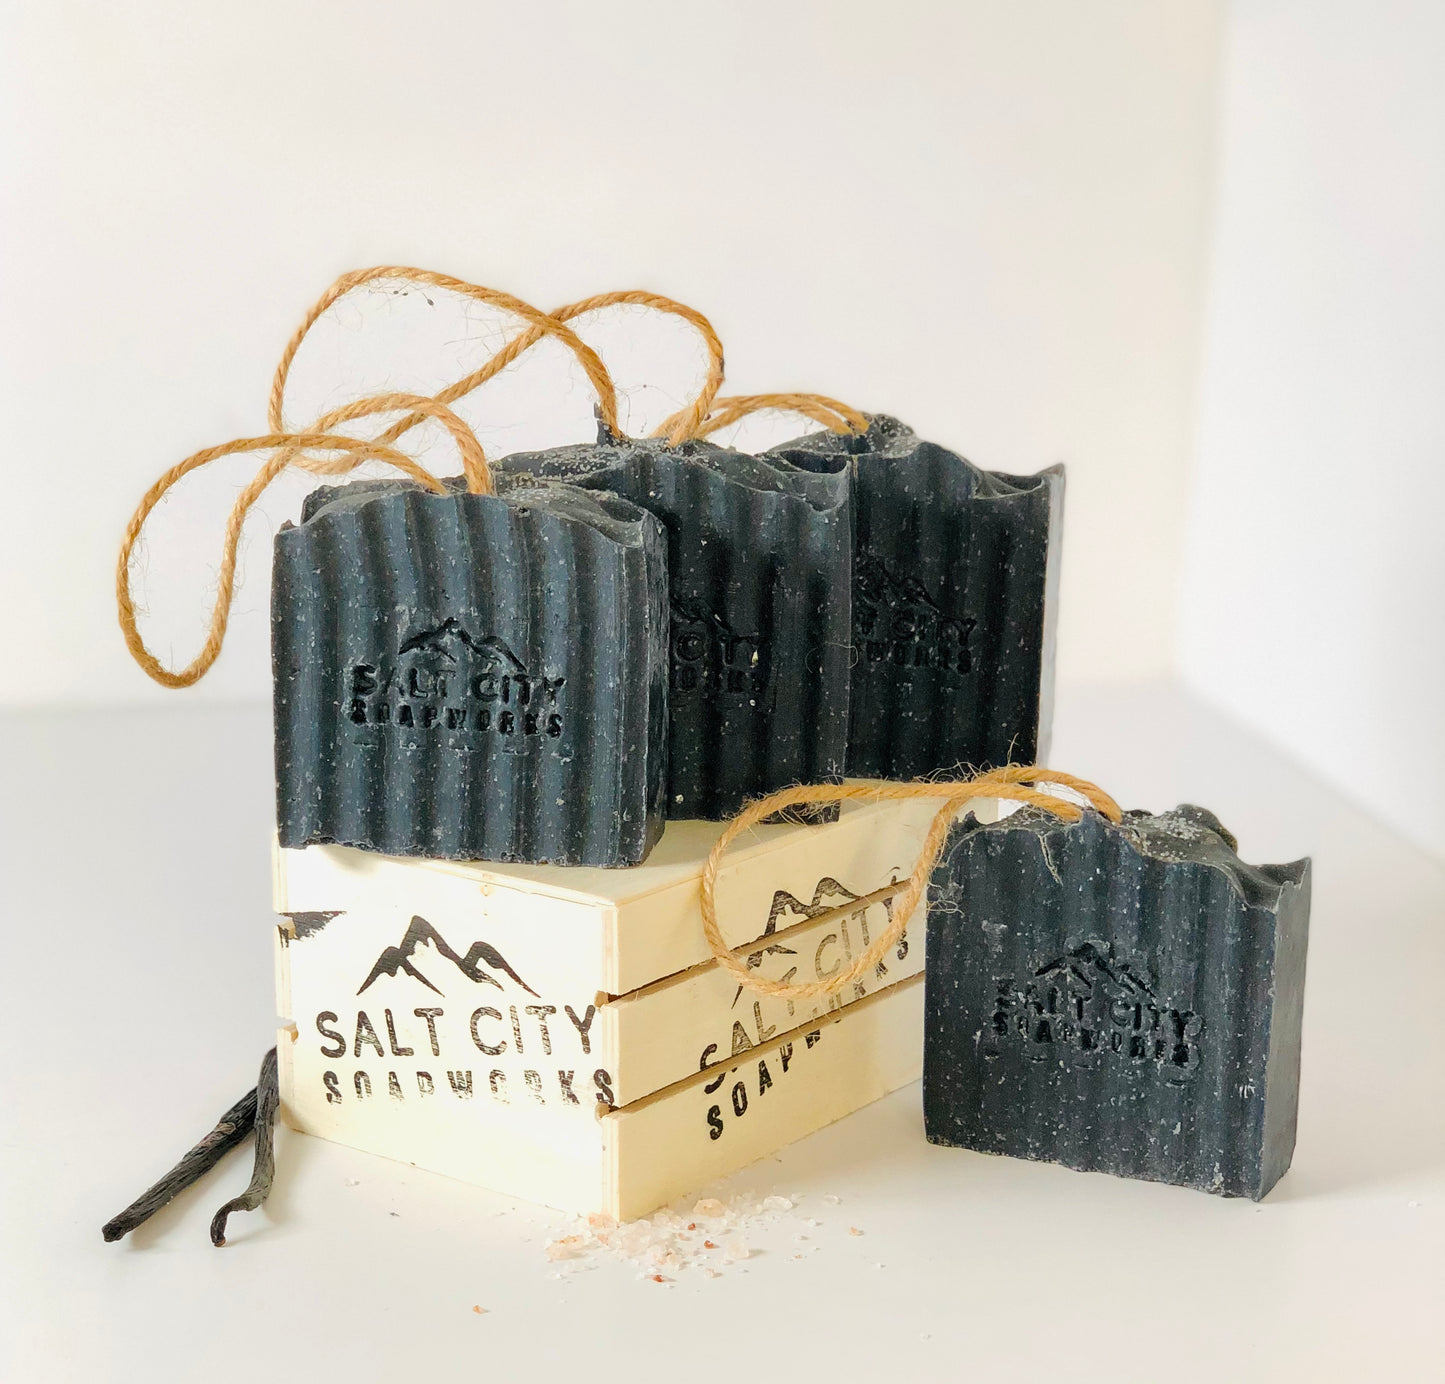 Exfoliating Soap on a Rope Set